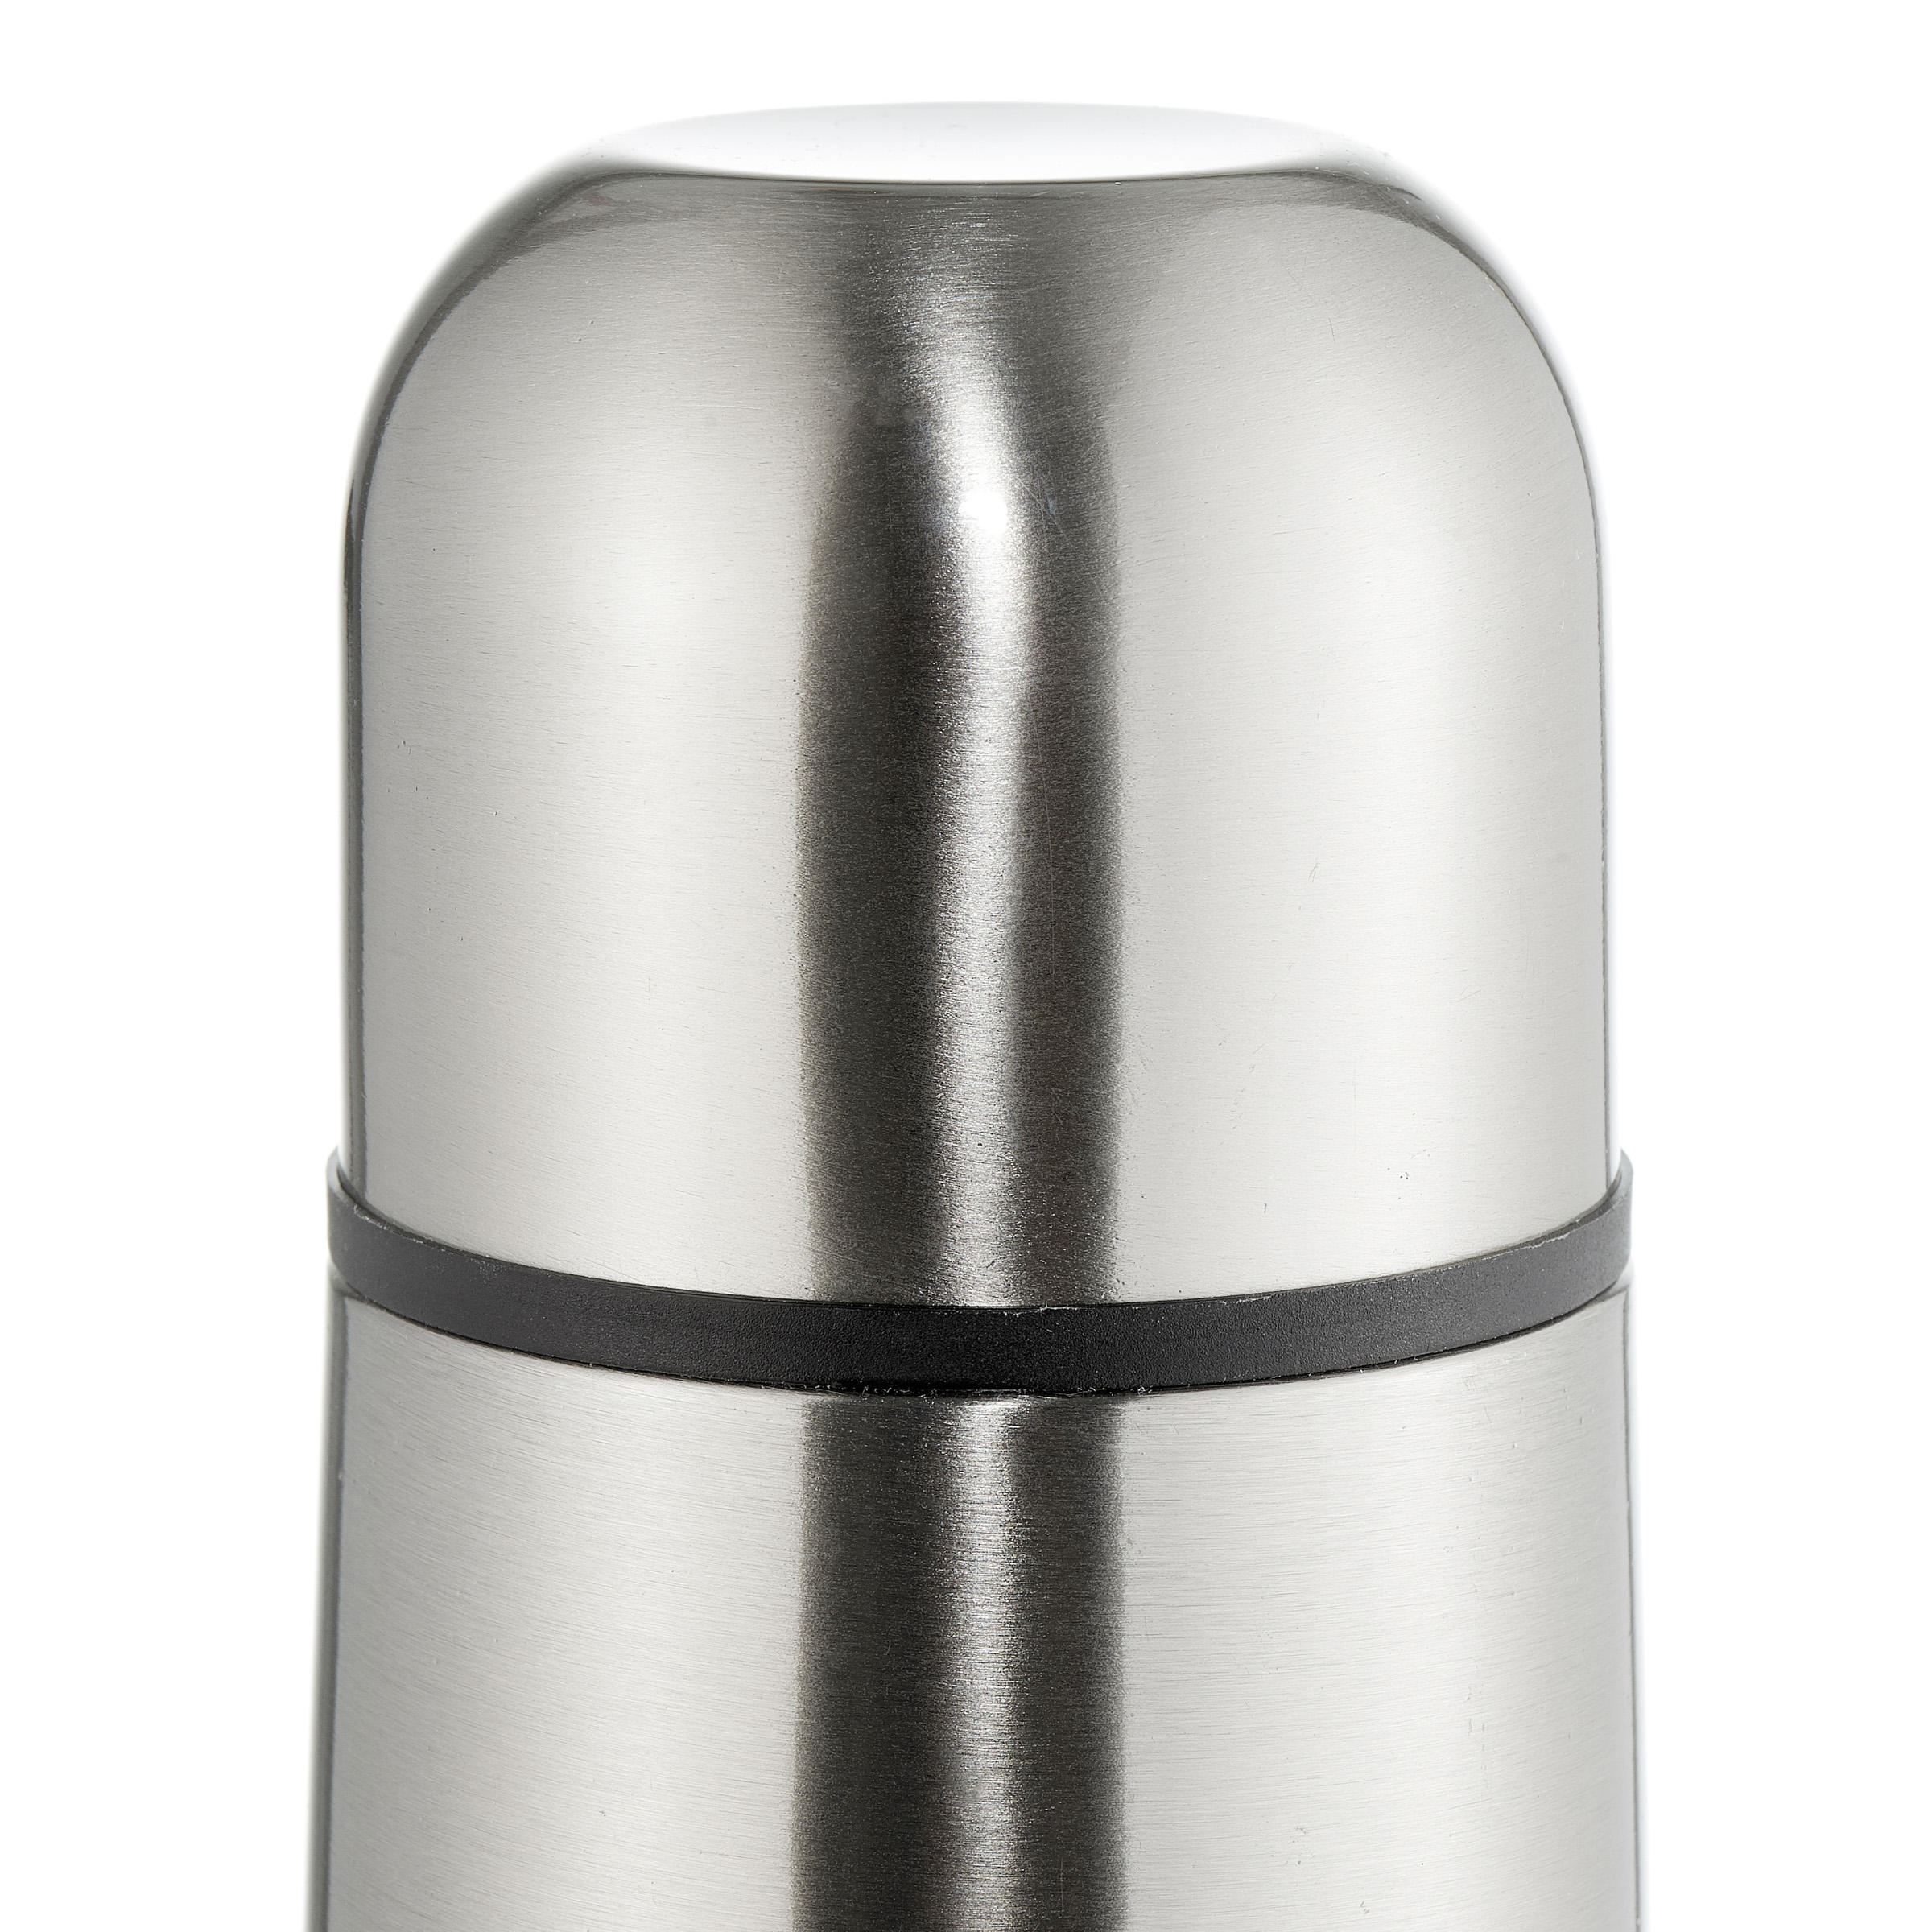 Stainless steel 0.7 L insulated bottle with cup for hiking - metal 5/10